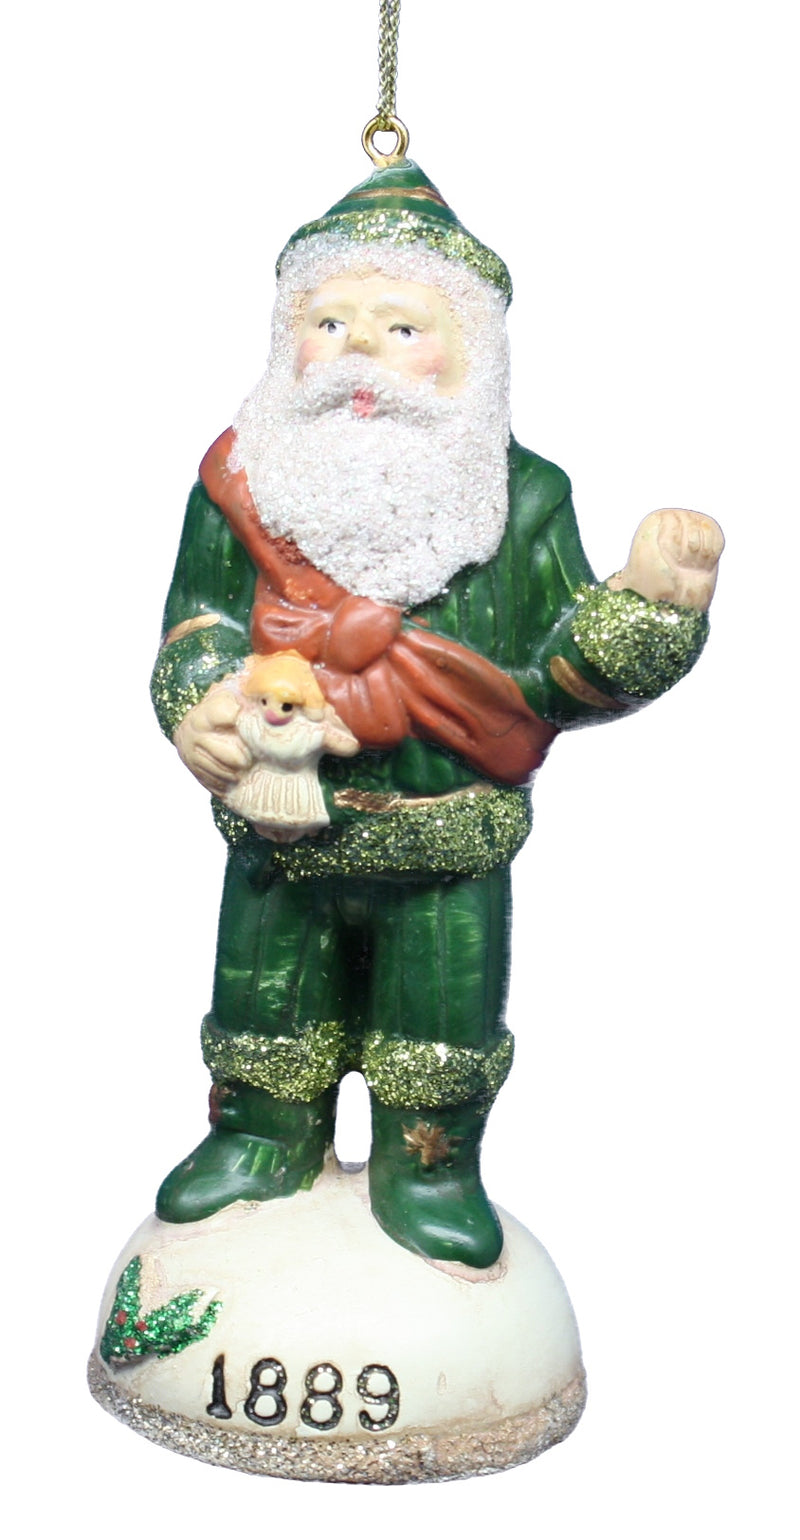 Santa Thru The Ages Ornament - 1889 - The Country Christmas Loft